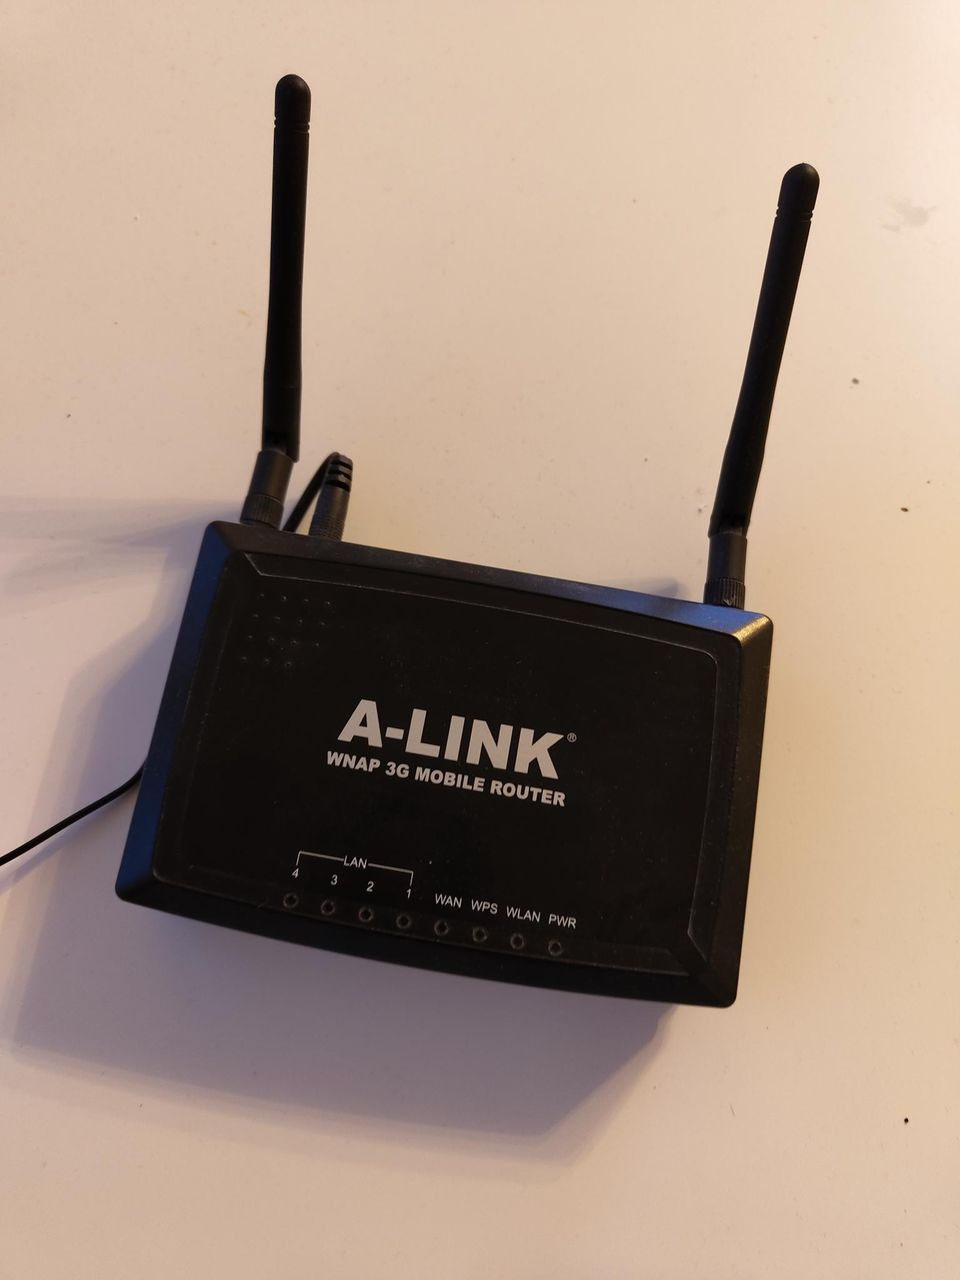 A-link WNAP 3g Mobile Router